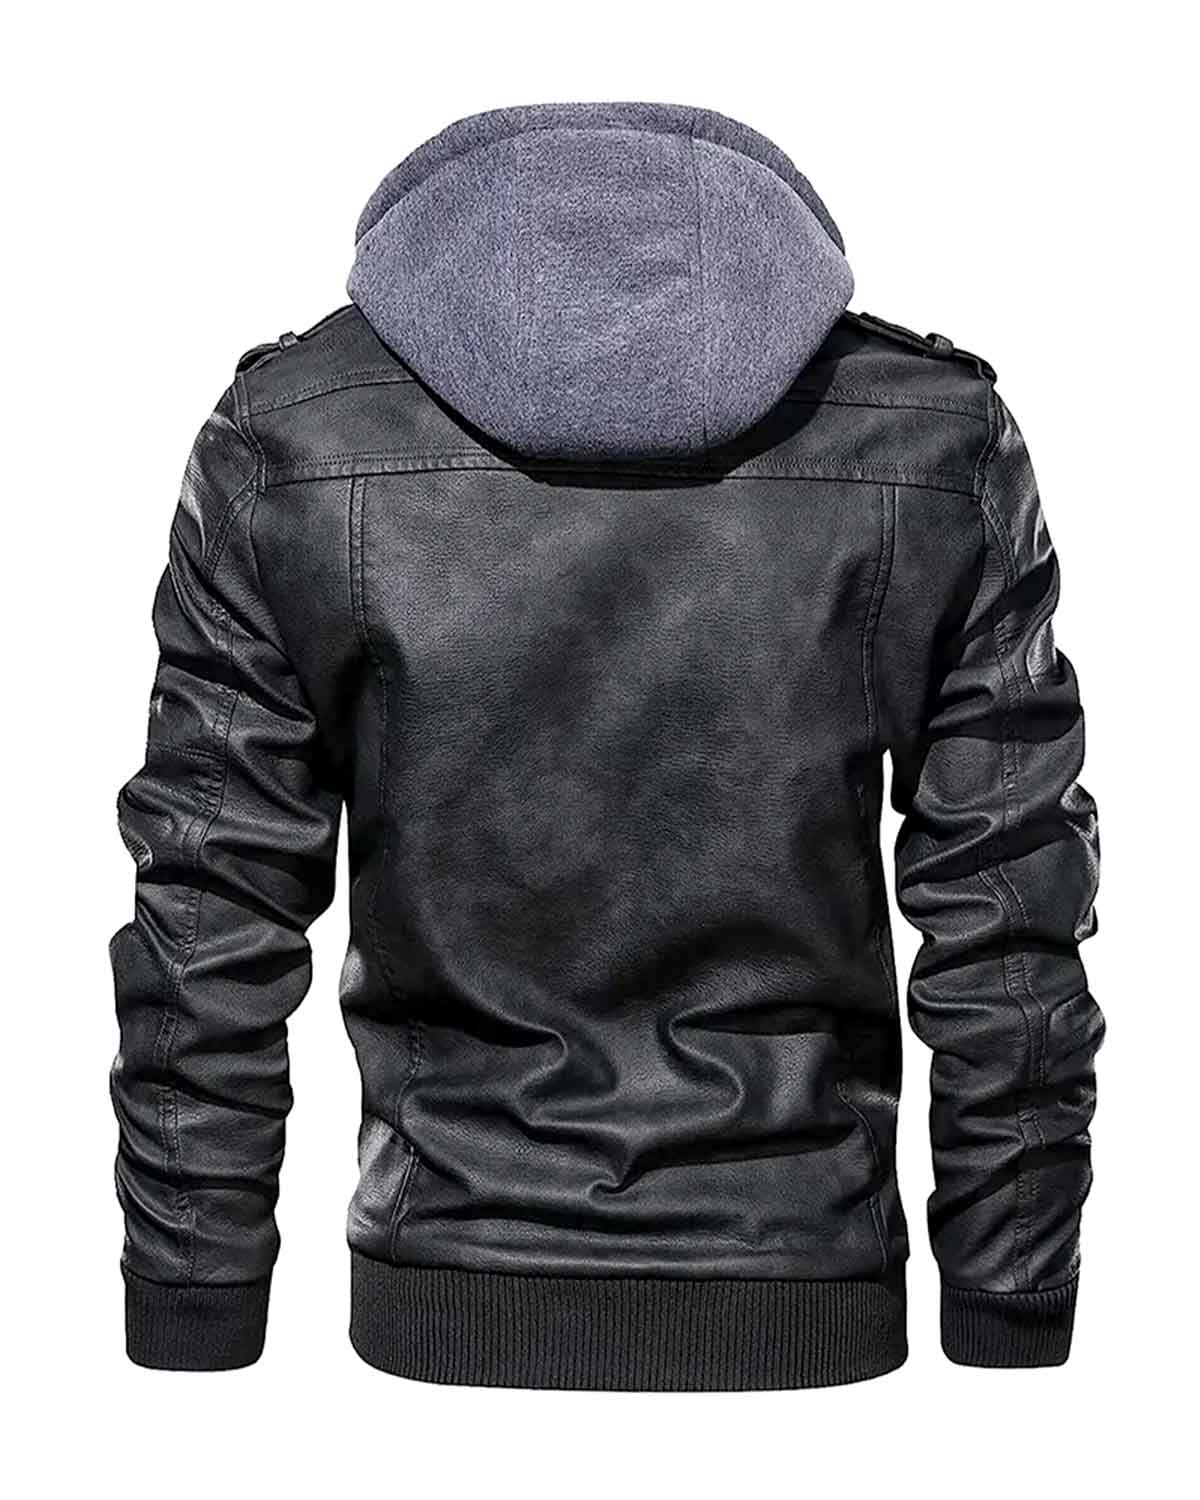 Mens Black Leather Jacket With Removable Hood 